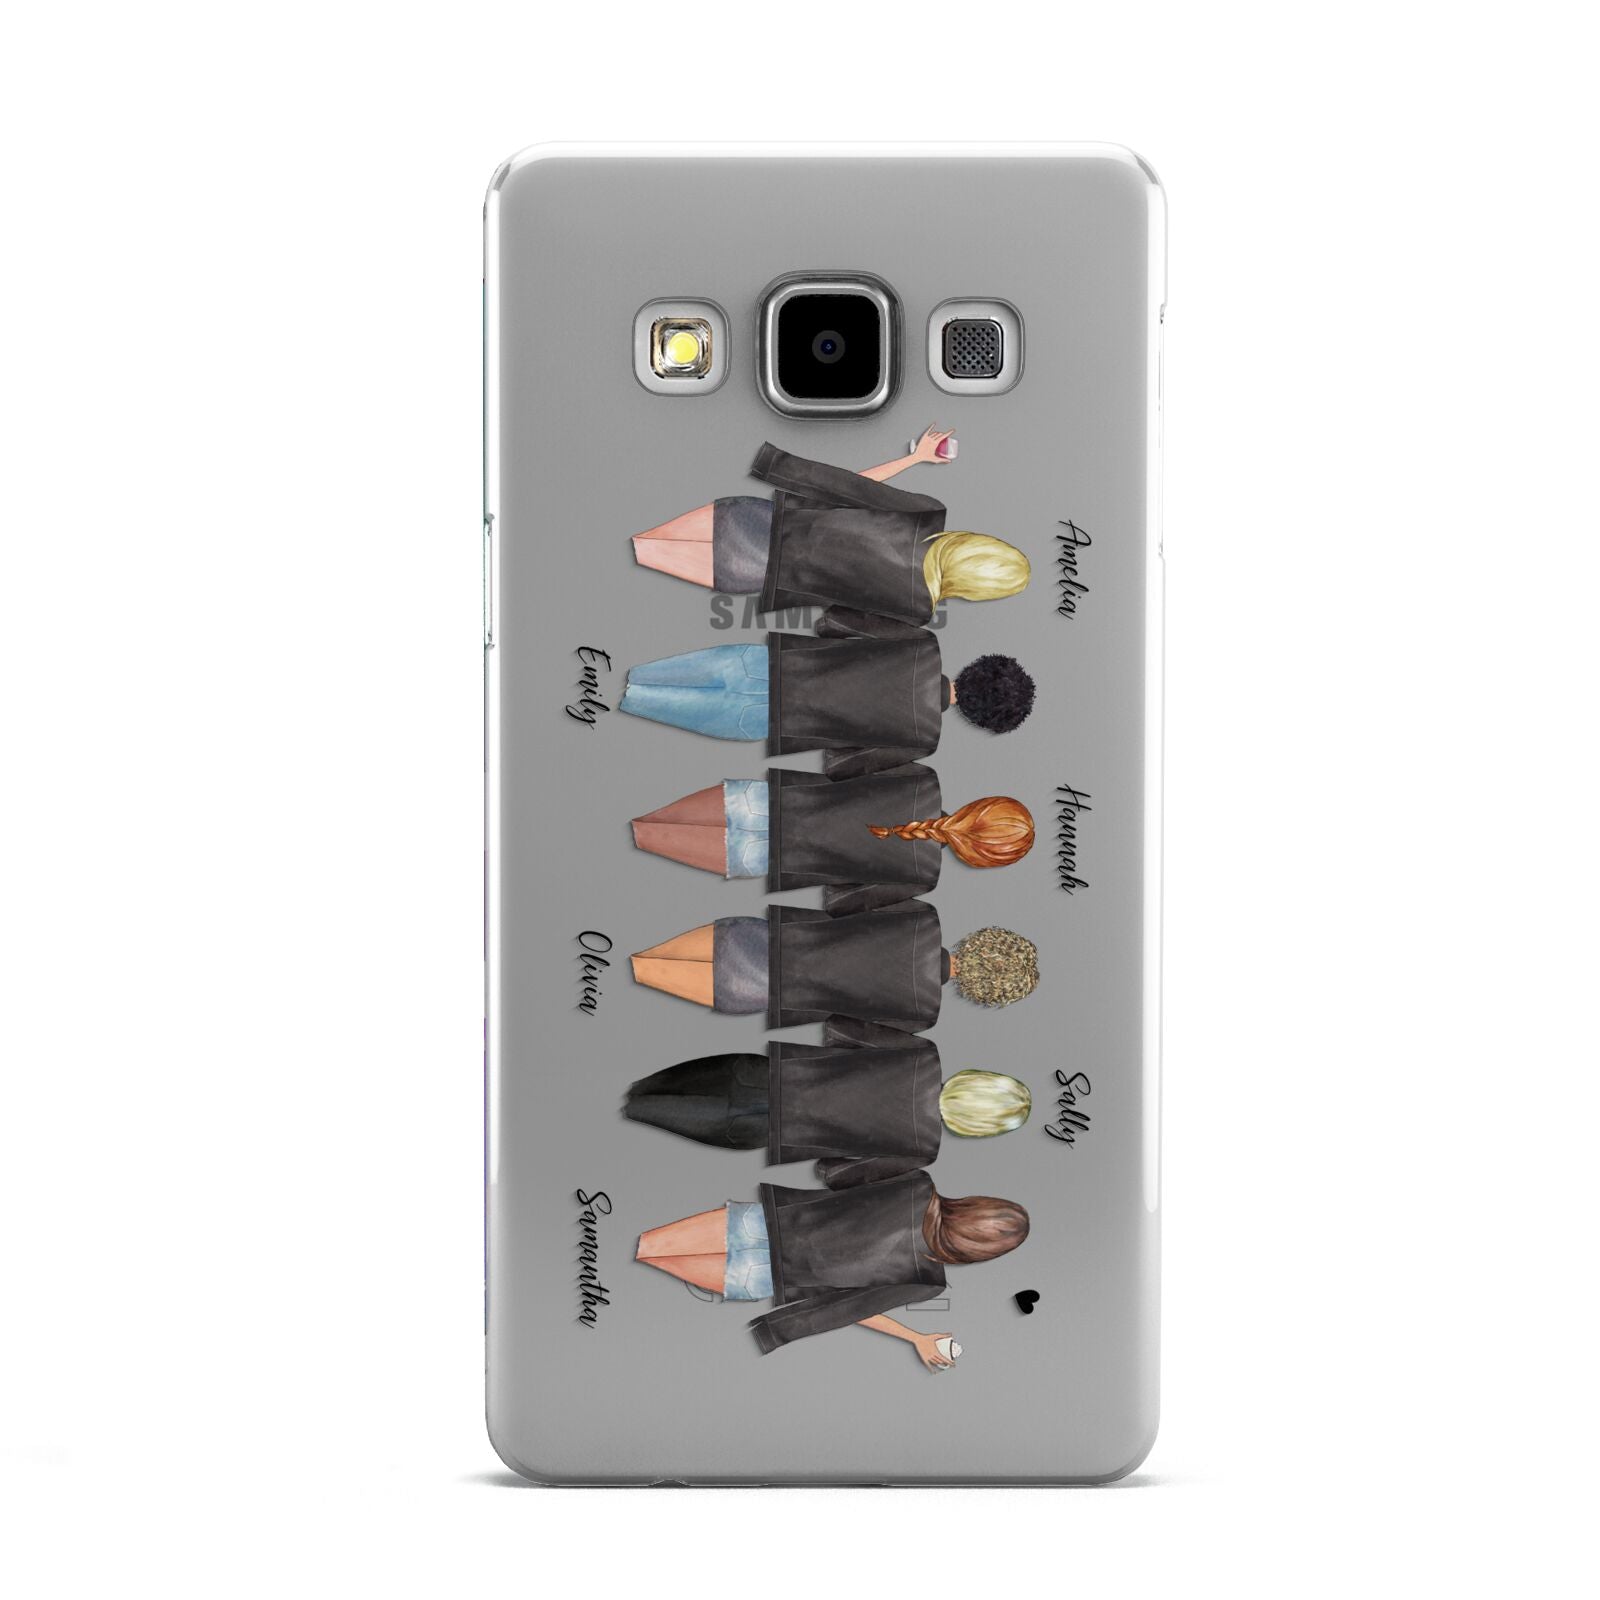 6 Best Friends with Names Samsung Galaxy A5 Case